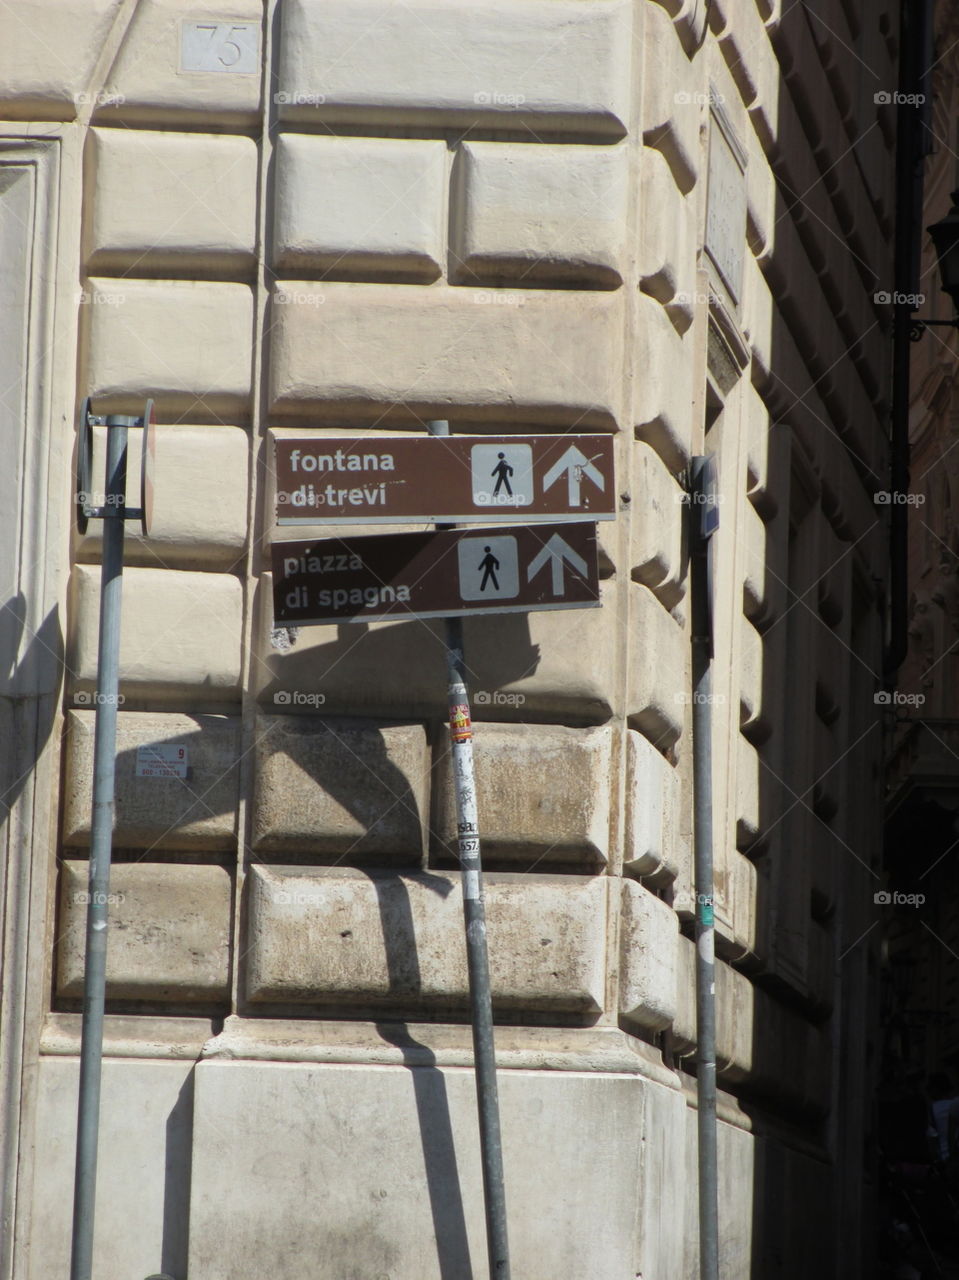 Rome signs
